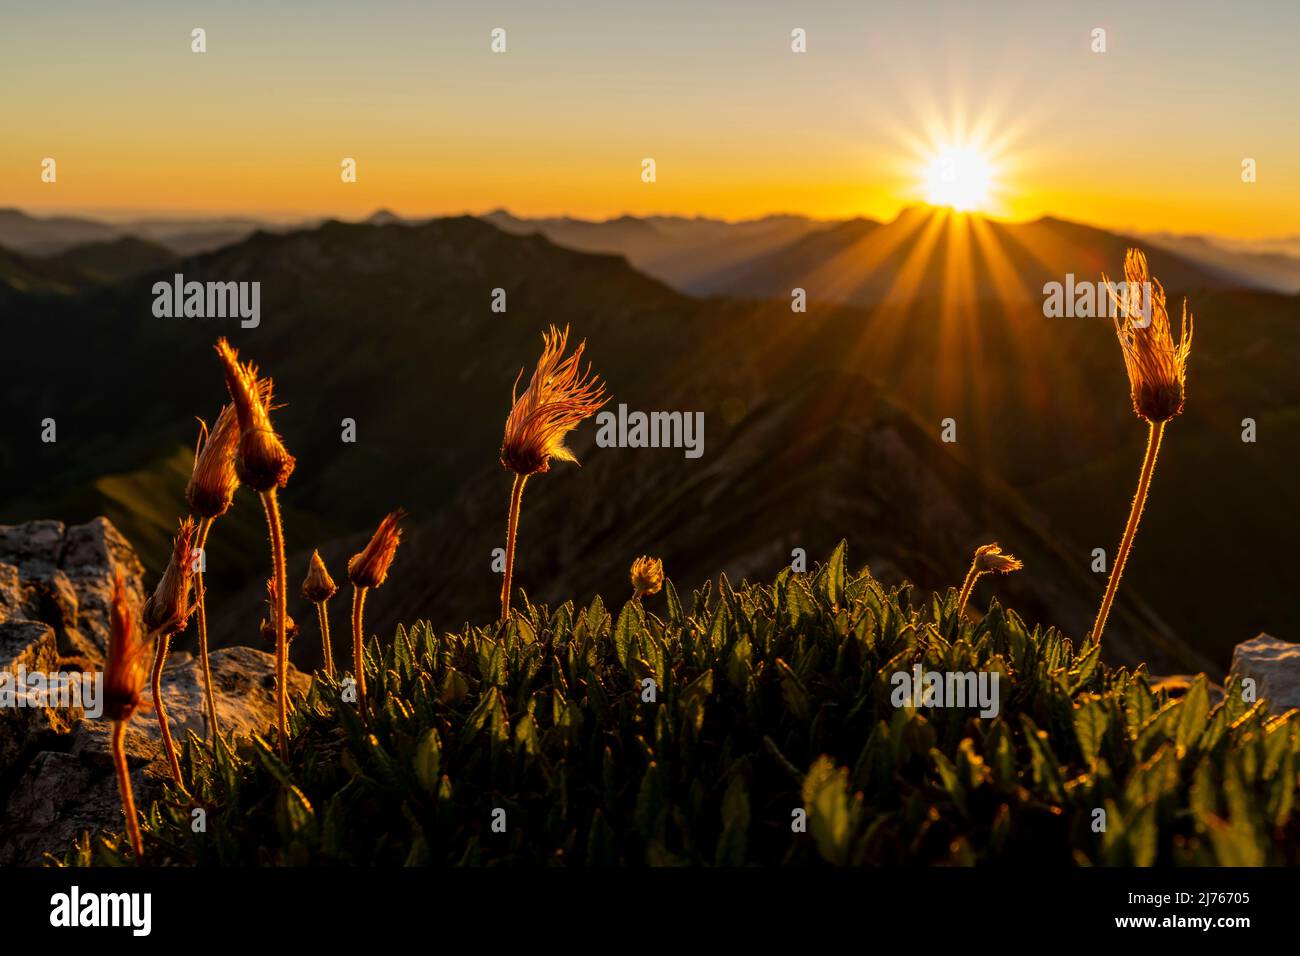 Fruit clusters of the alpine pasque flower, also called alpine cowbell or alpine anemone, during sunrise at the summit of the Mondscheinspitze in Karwendel. In the background a sun star of the sunrise over the Alps, in a bright blue sky. Stock Photo